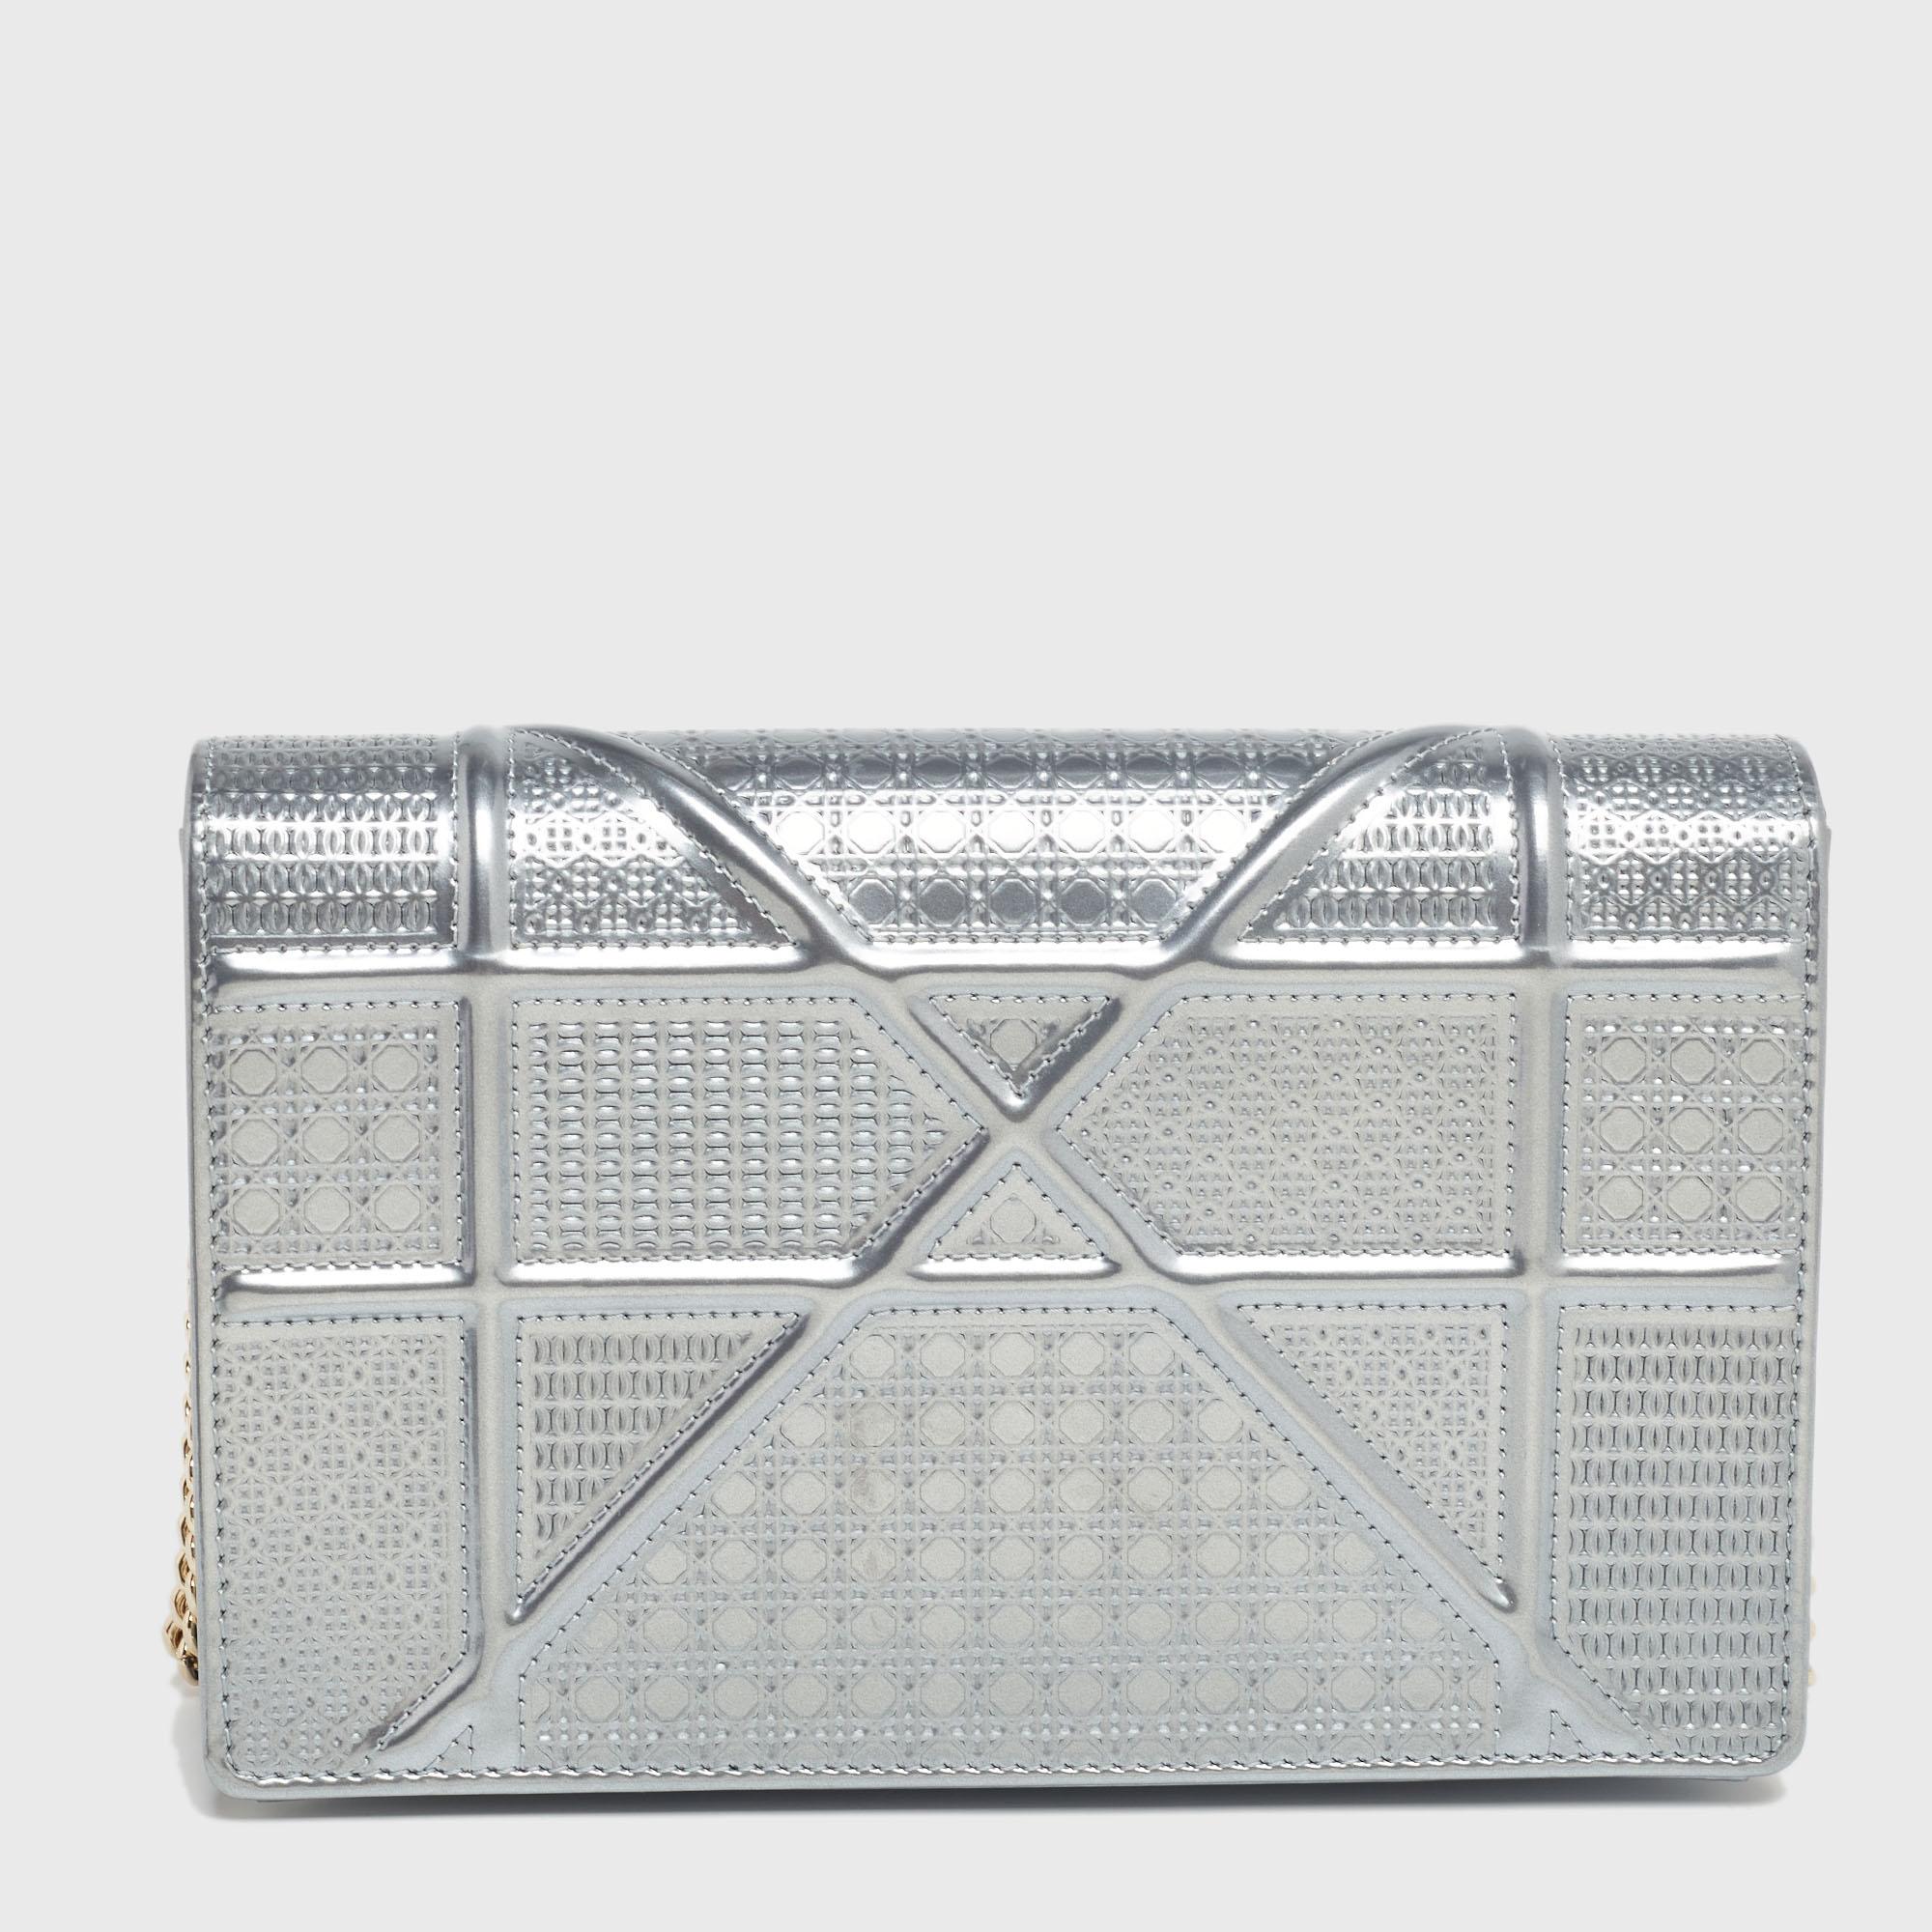 This Diorama bag is simply breathtaking! From its structured shape to its artistic craftsmanship, the bag sweeps us off our feet. It has been crafted from metallic silver patent leather and is covered in the brand's signature Cannage pattern. The